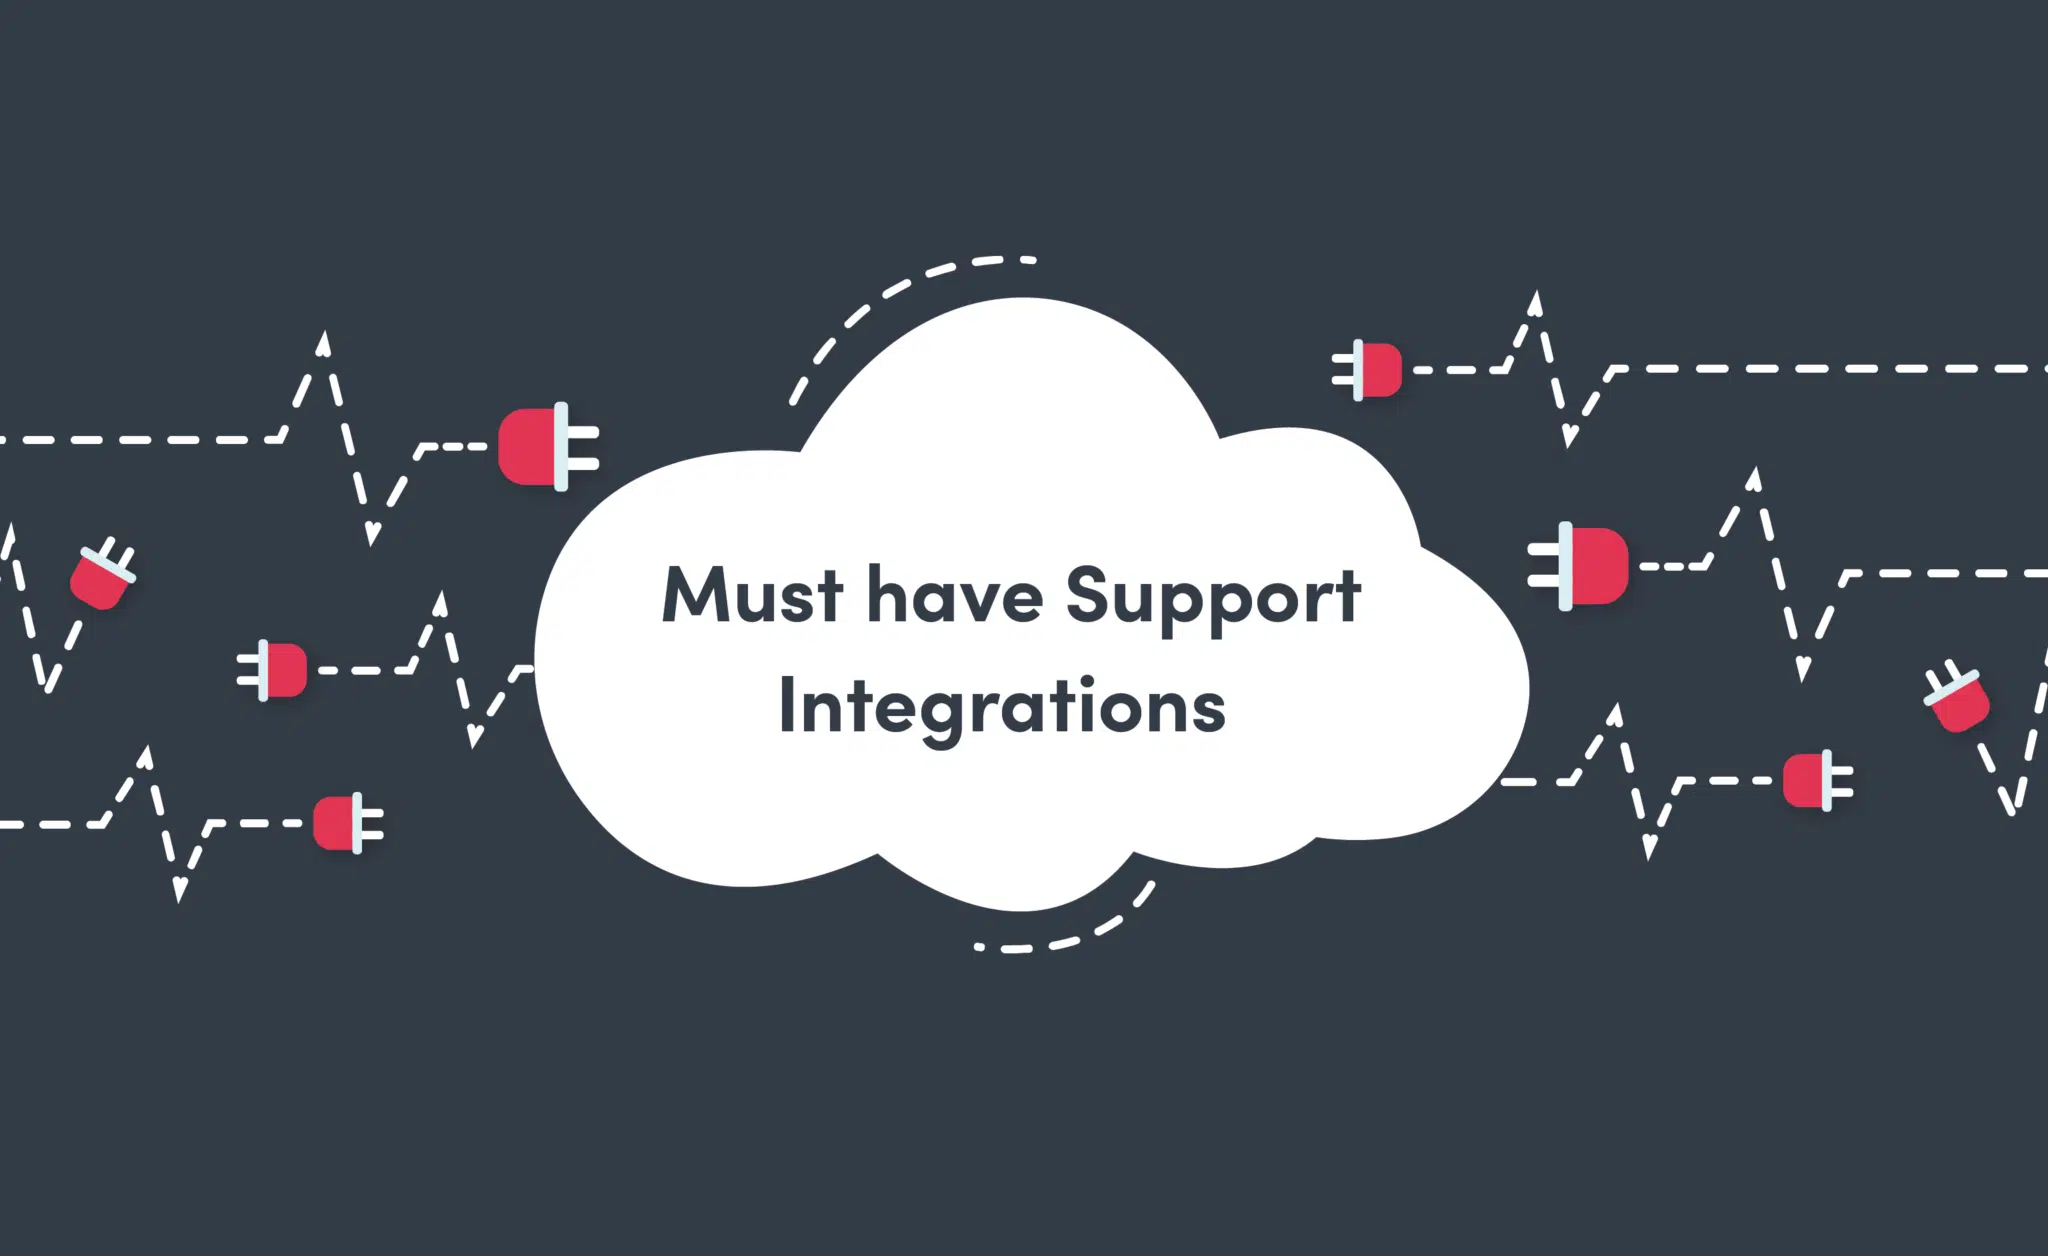 Must have Support Integrations